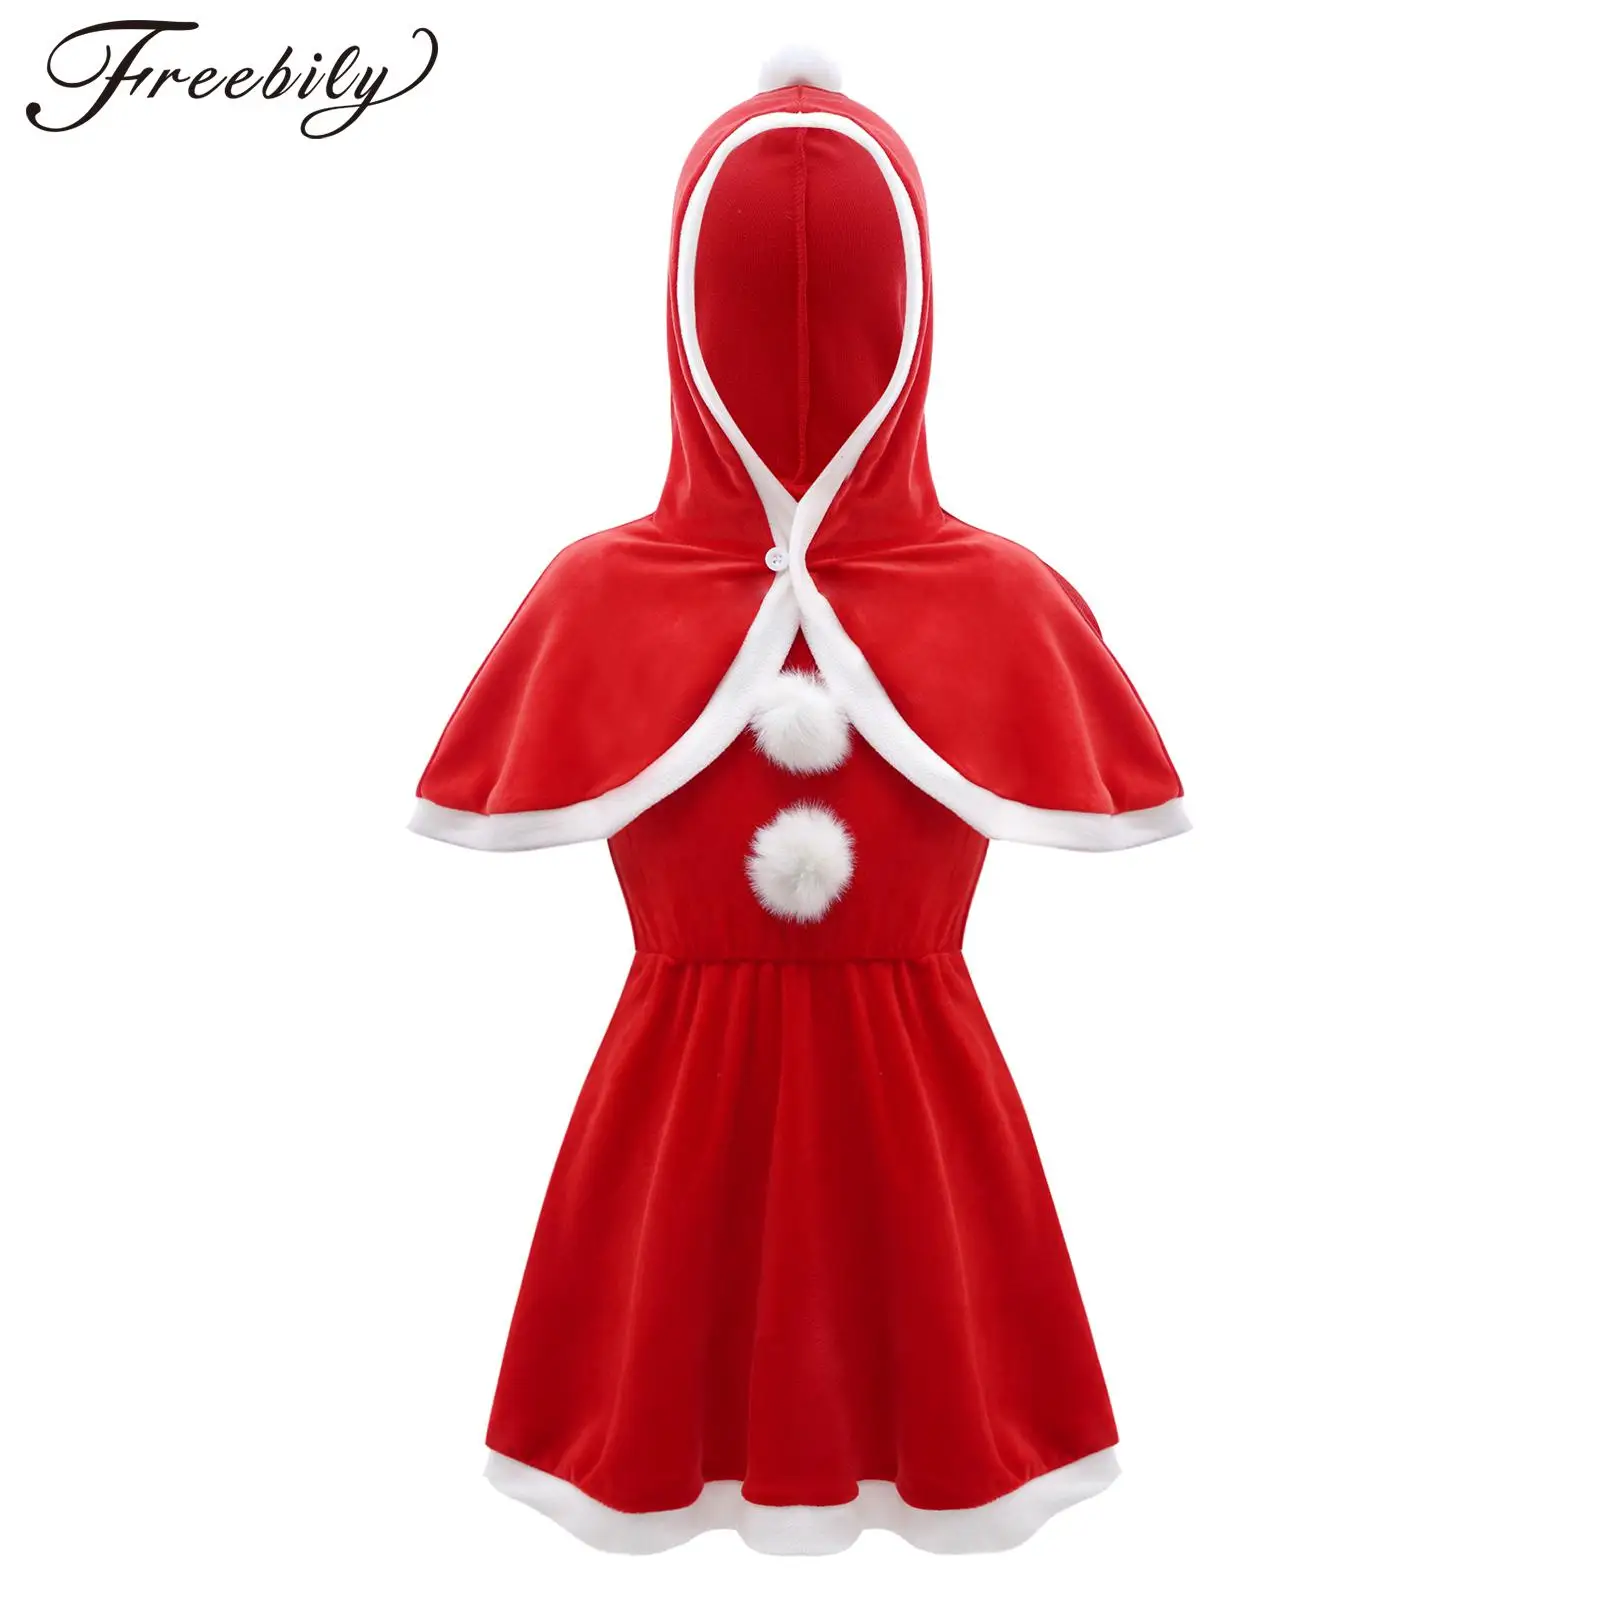 

Toddler Girls Christmas Clothes Santa Claus Cosplay Costume Sleeveless Pom-poms Dress with Hooded Shawls Party Roleplay Outfits